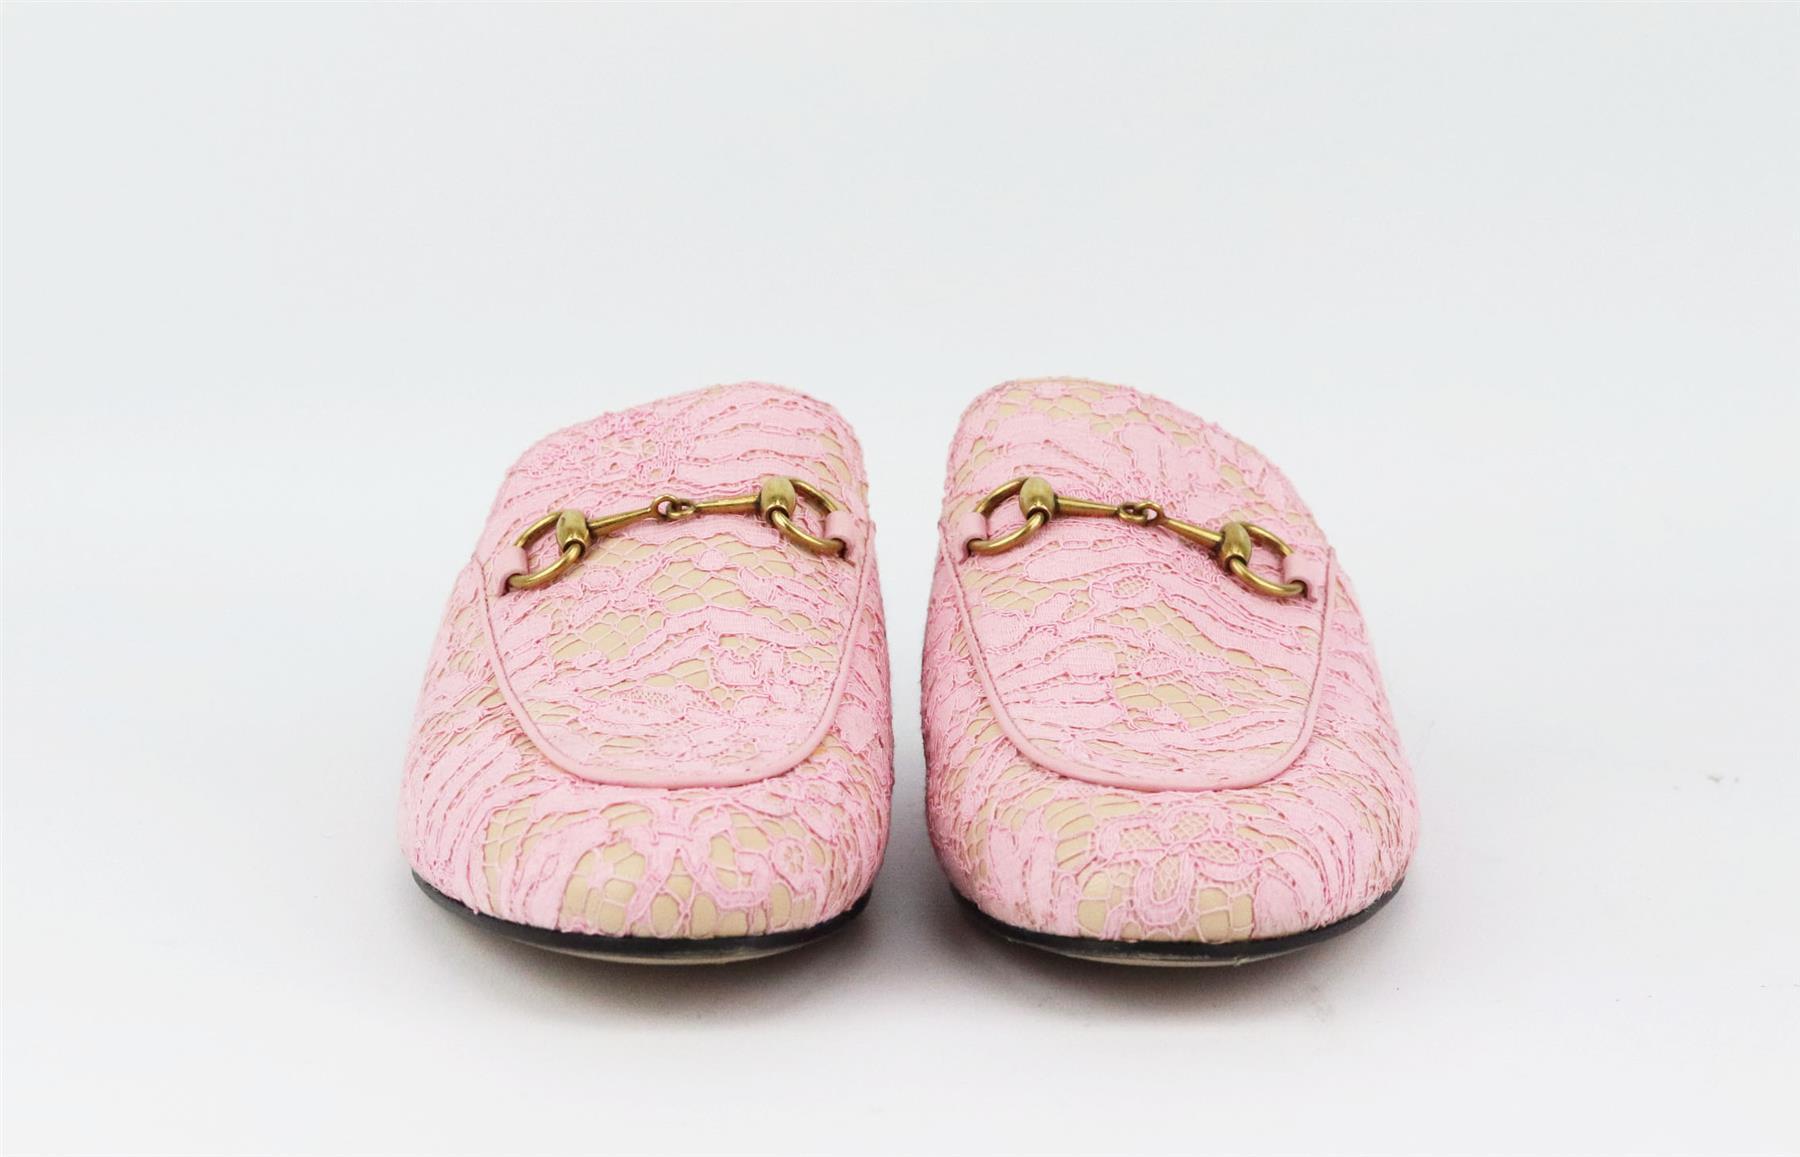 These ‘Princetown’ slippers are crafted from smooth pink lace and beige leather and are a versatile option for the office or evenings out, the almond-toe pair is adorned with the house's iconic horsebit plaque. Sole measures approximately 10 mm/ 0.5